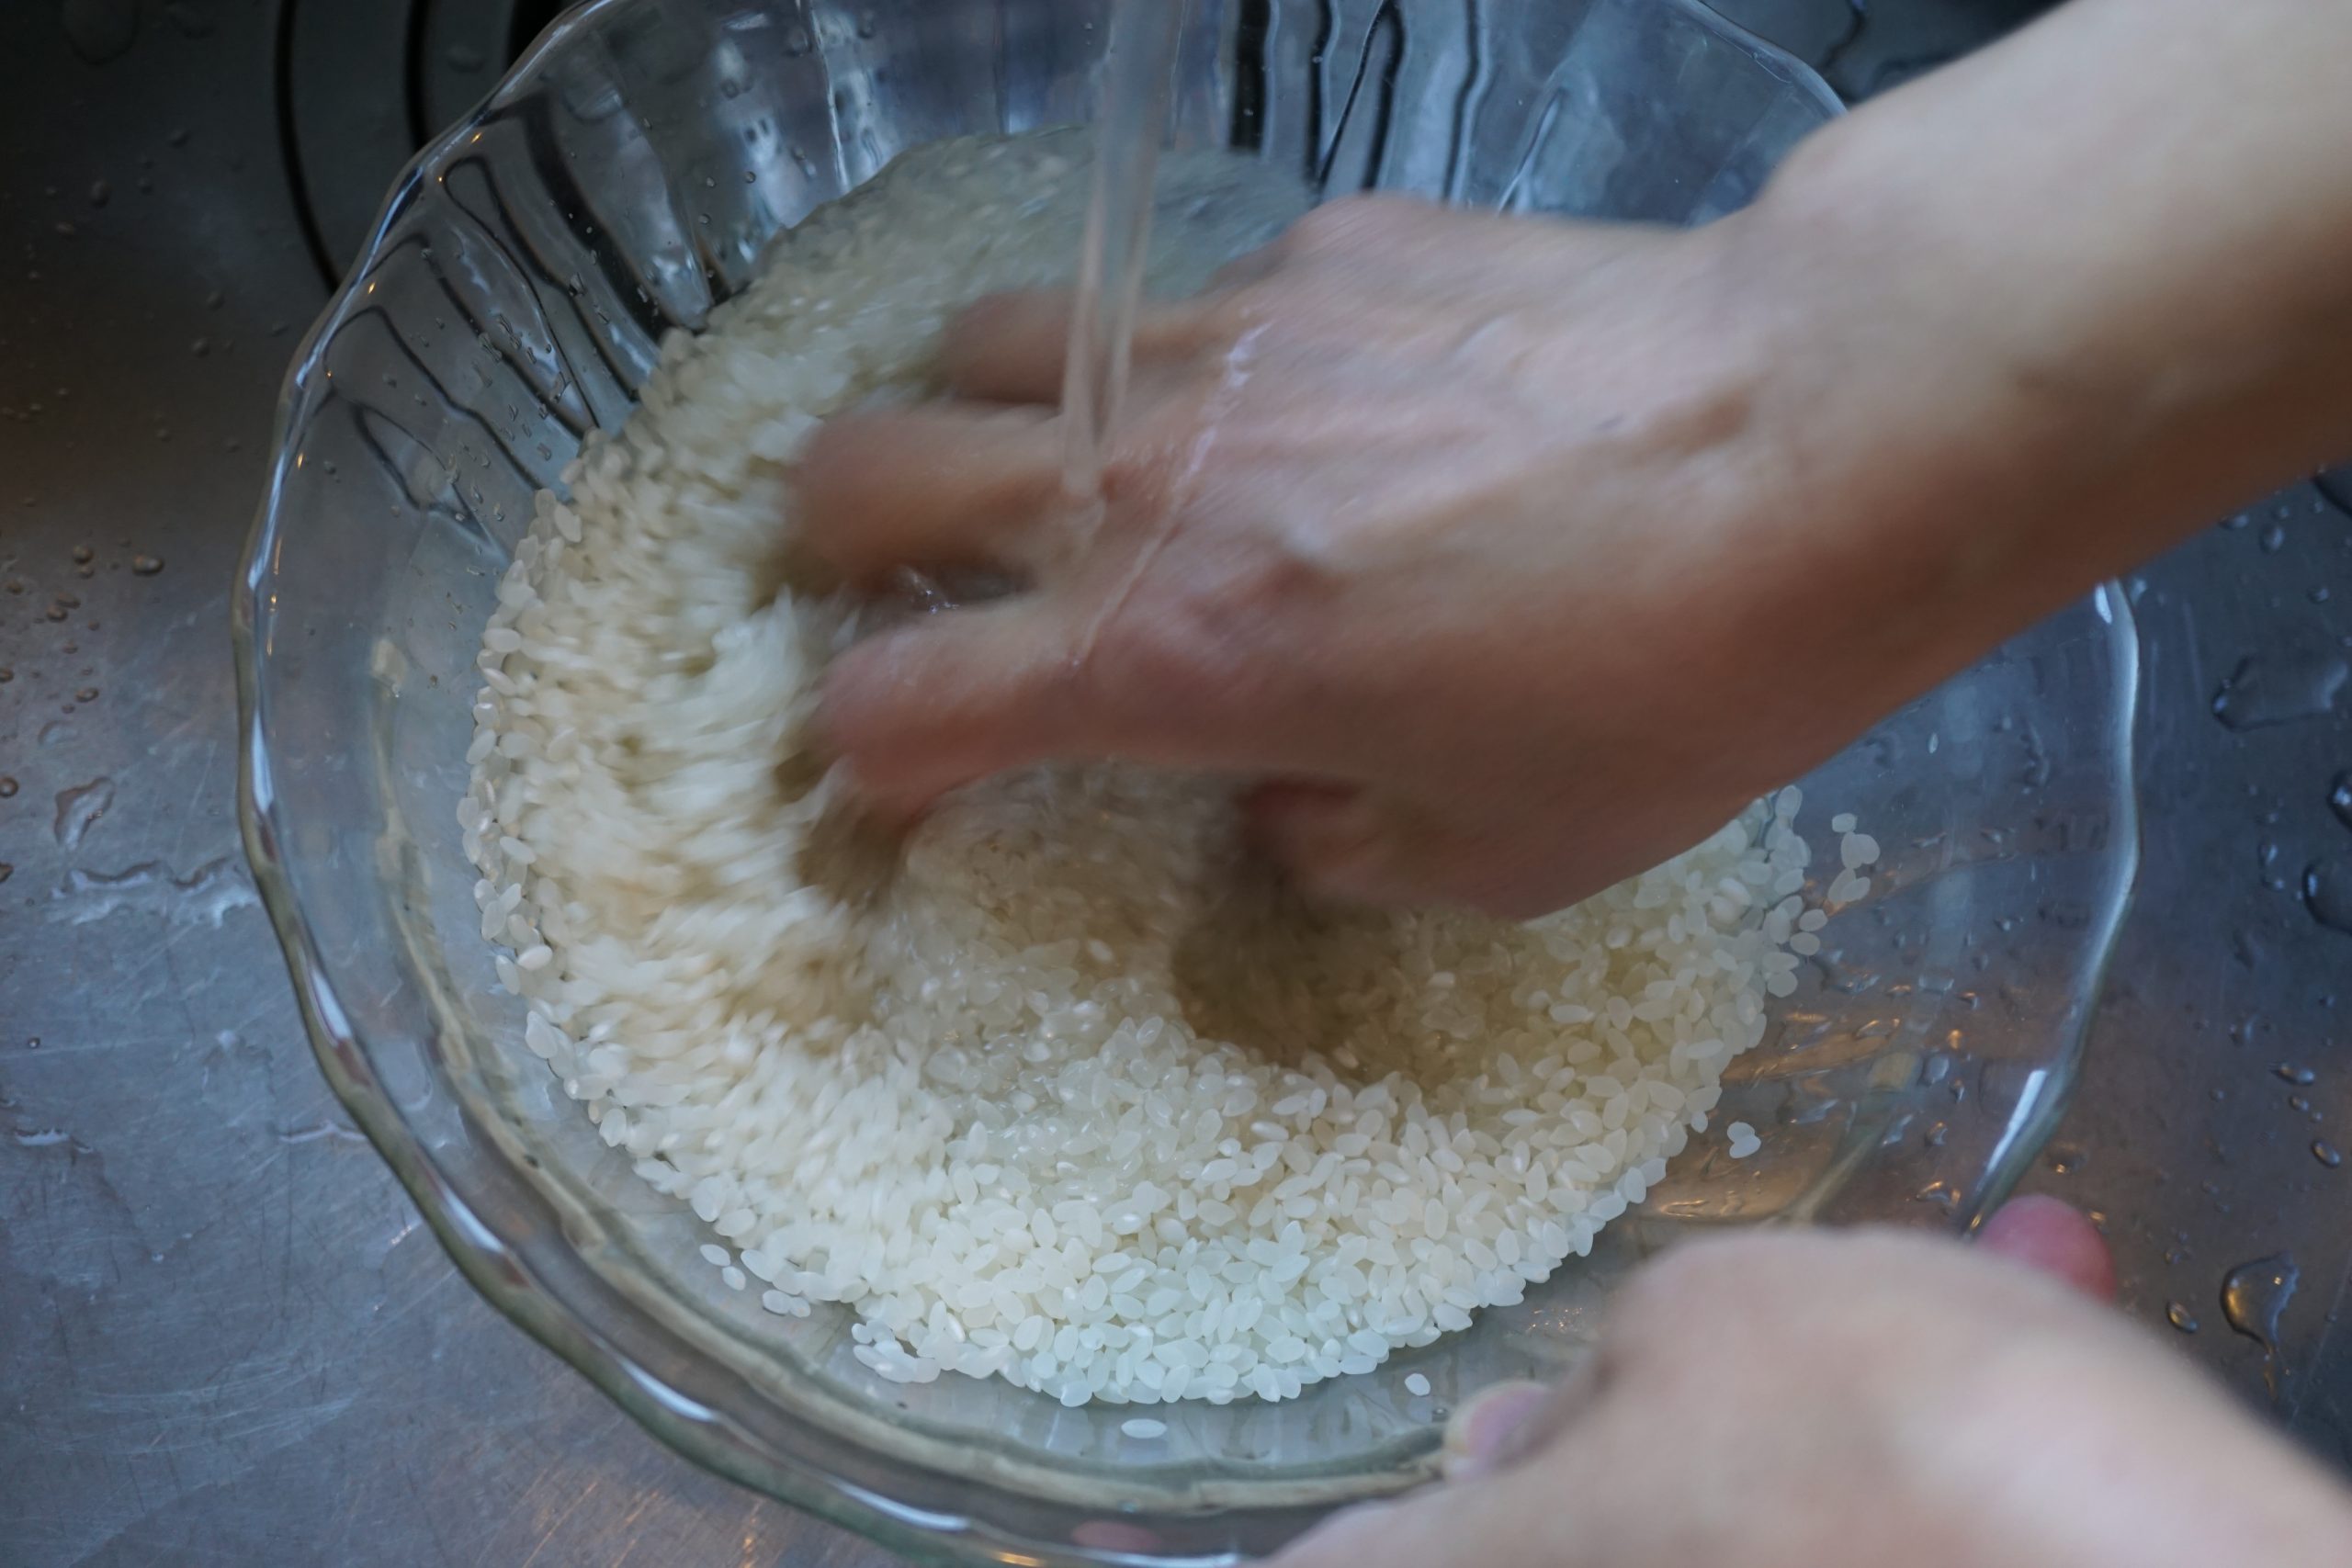 How to Make Japanese Rice: Washing, Cooking & More - JapanLivingGuide.net -  Living Guide in Japan